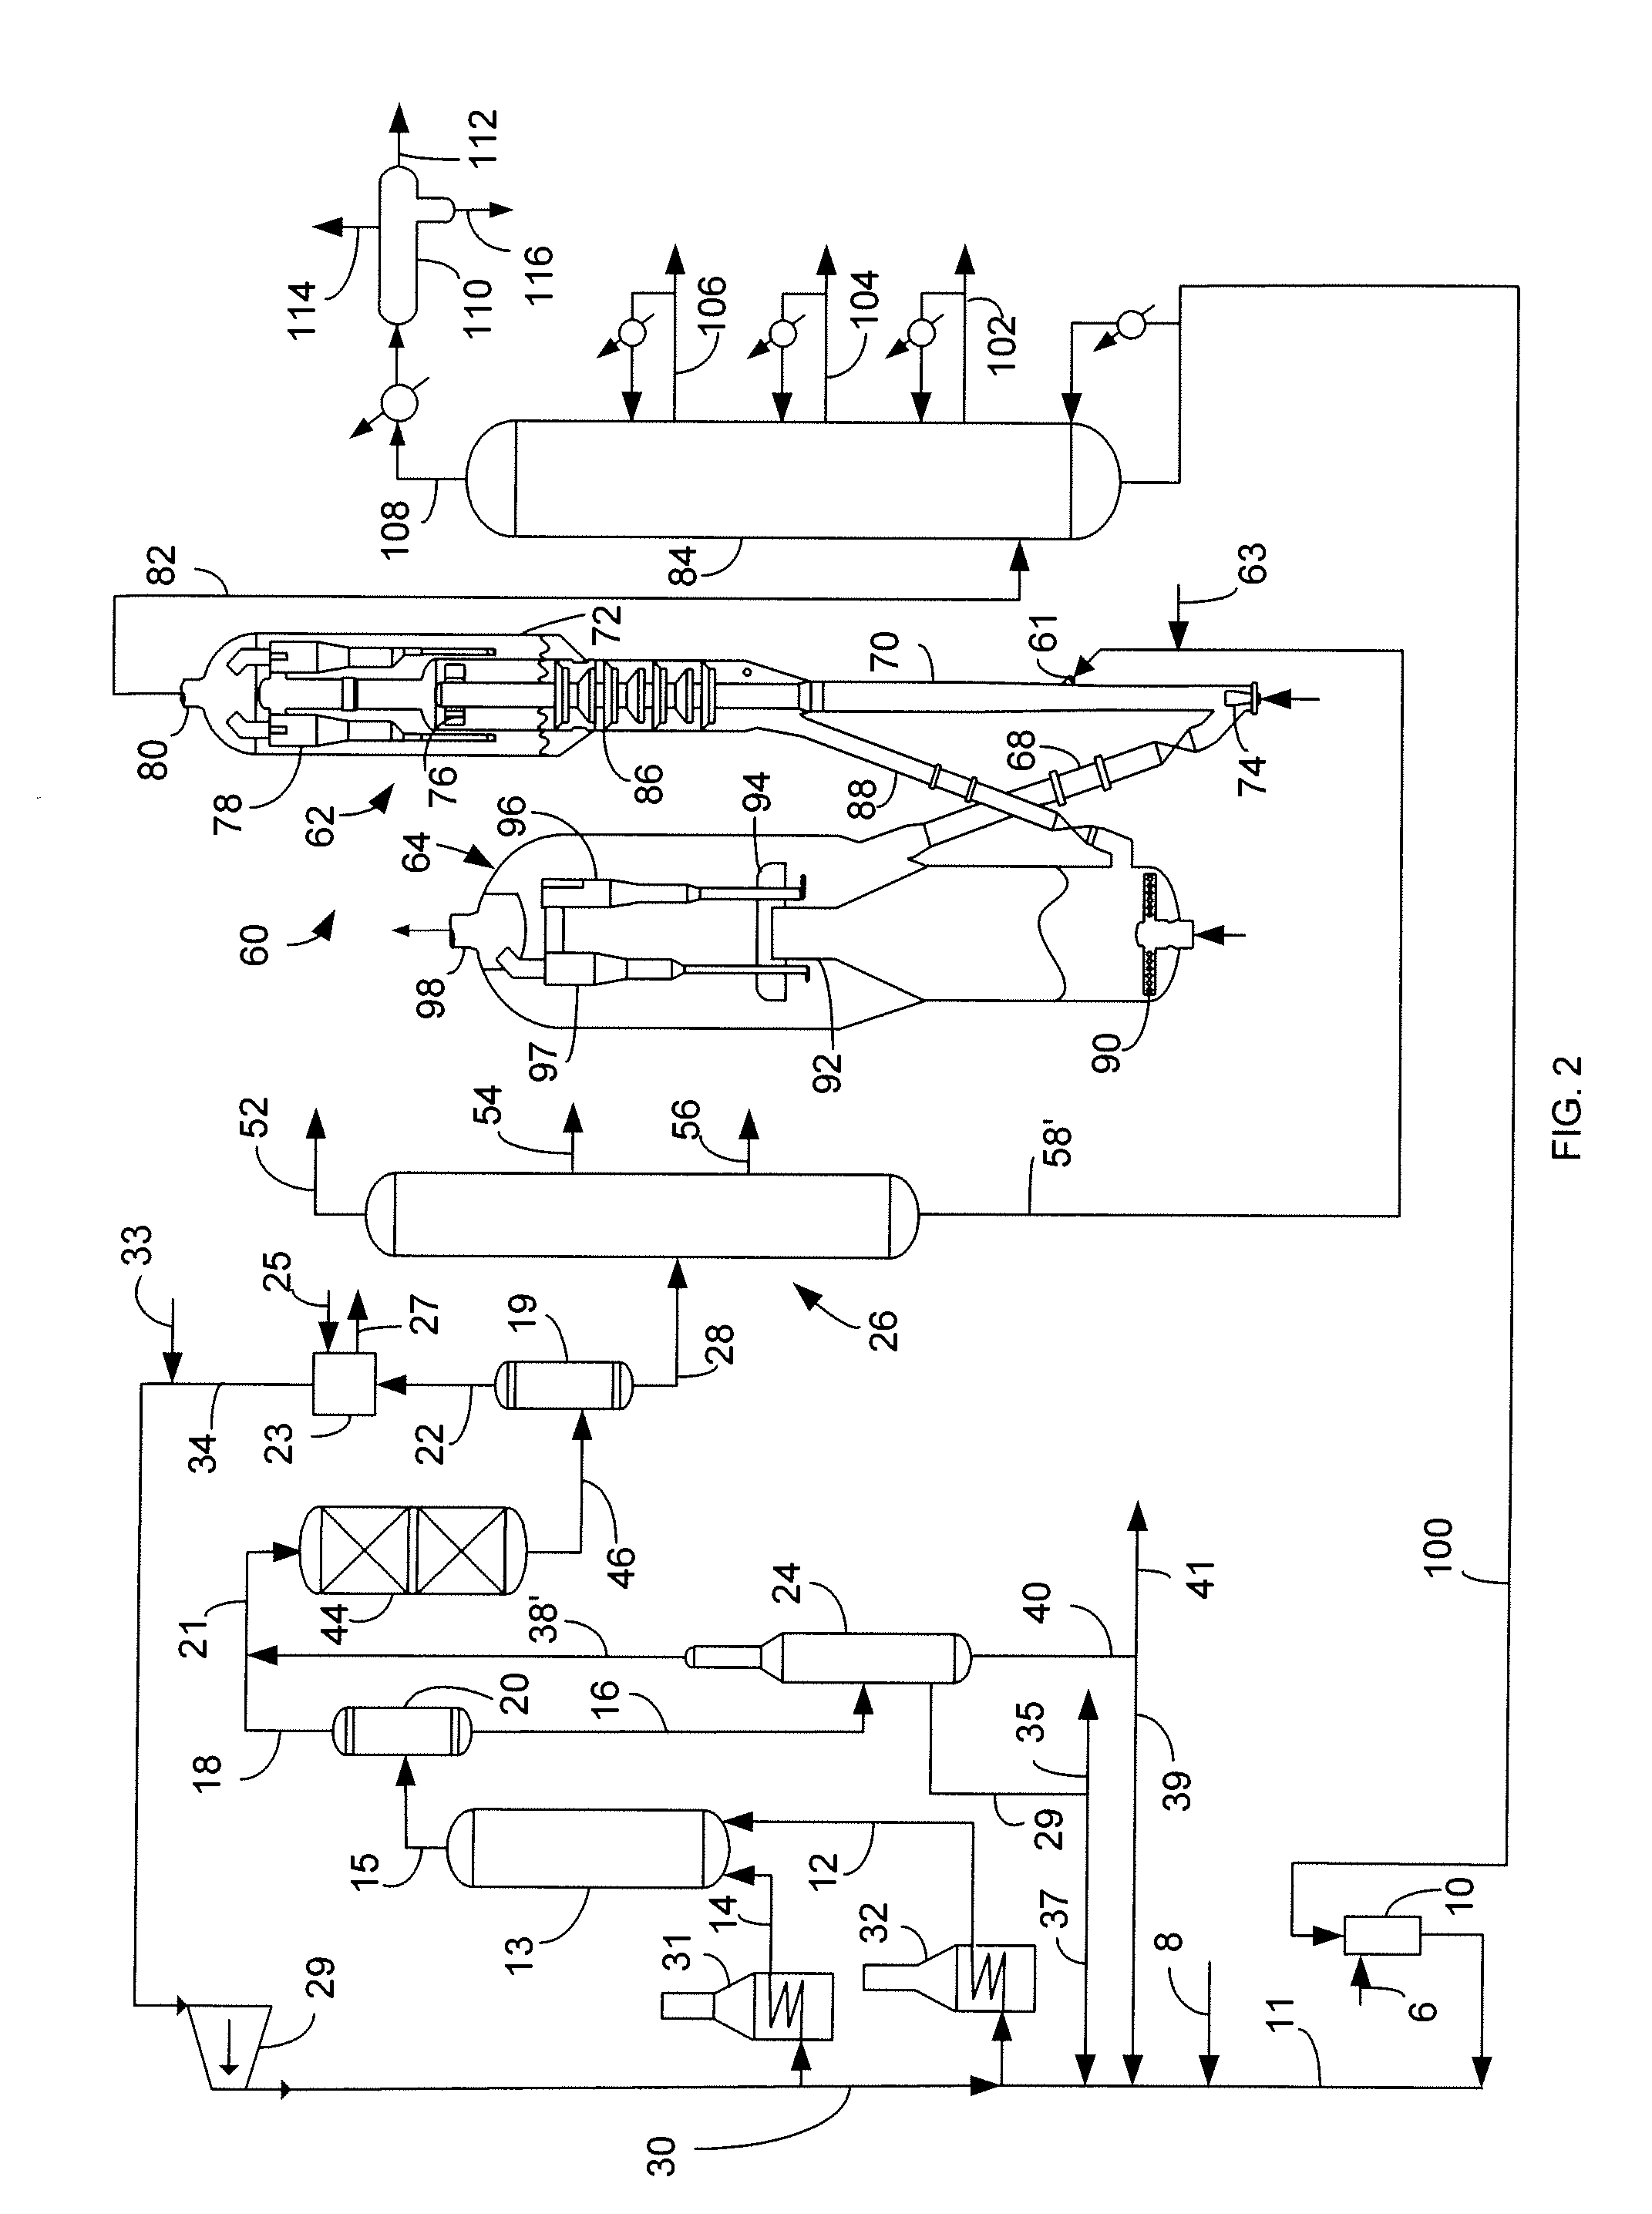 Apparatus for Integrated Heavy Oil Upgrading